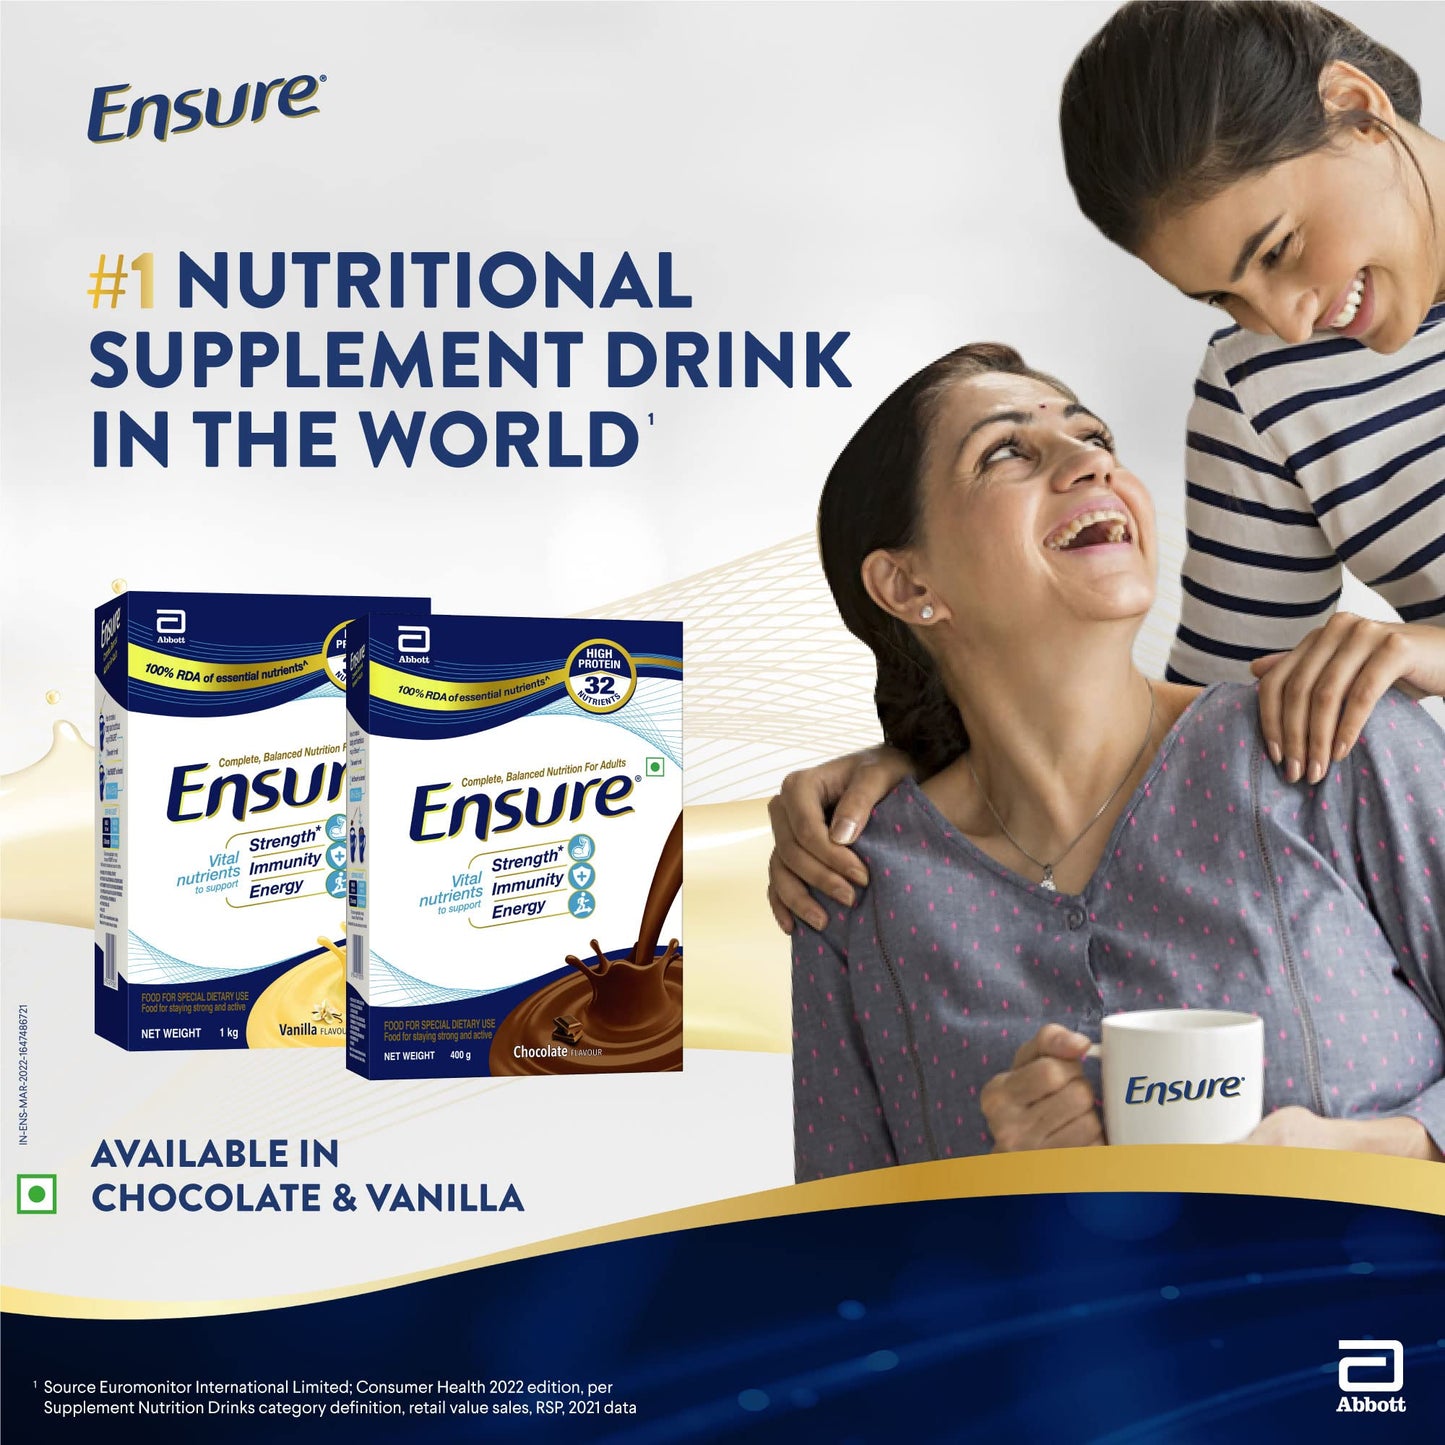 Ensure- Complete Nutrition for Adults with High Protein and 11 immunity nutrients- 400 gm Jar (Vanilla Flavour)